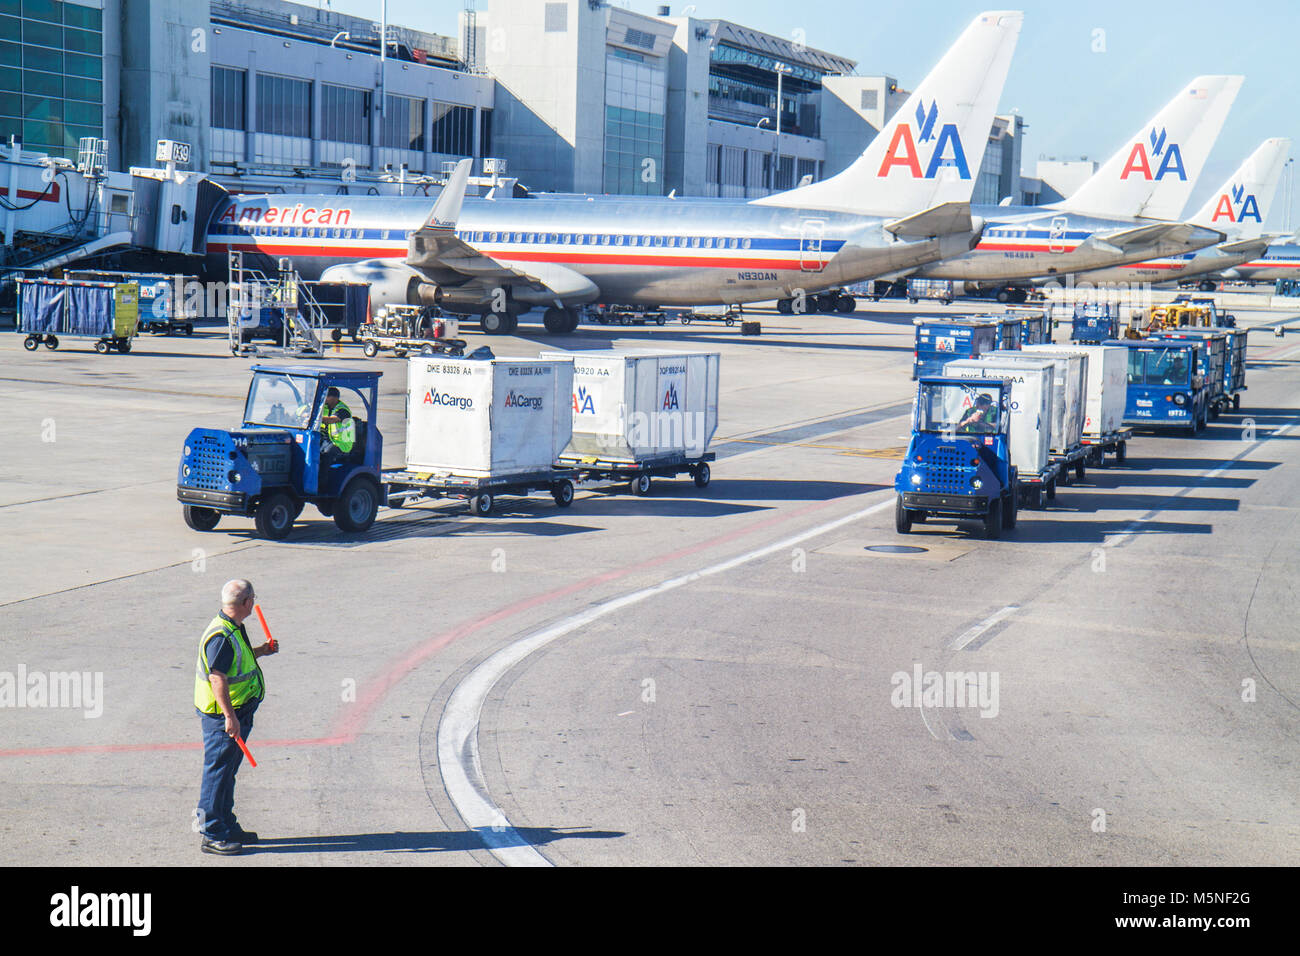 Miami Florida International Airport MIA,aviation,American Airlines,international carrier,fleet,logo,gate,tarmac,apron,commercial airliner airplane pla Stock Photo